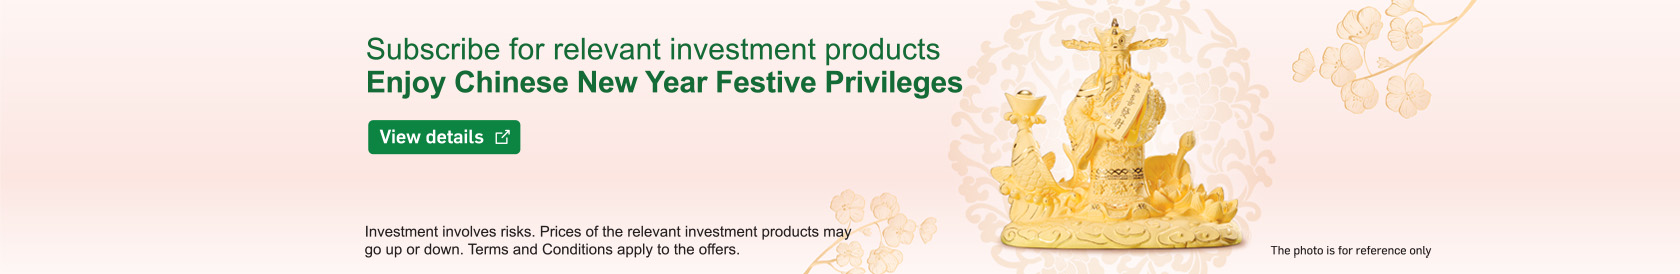 Subscribe for relevant investment products Enjoy Chinese New Year Festive Privileges